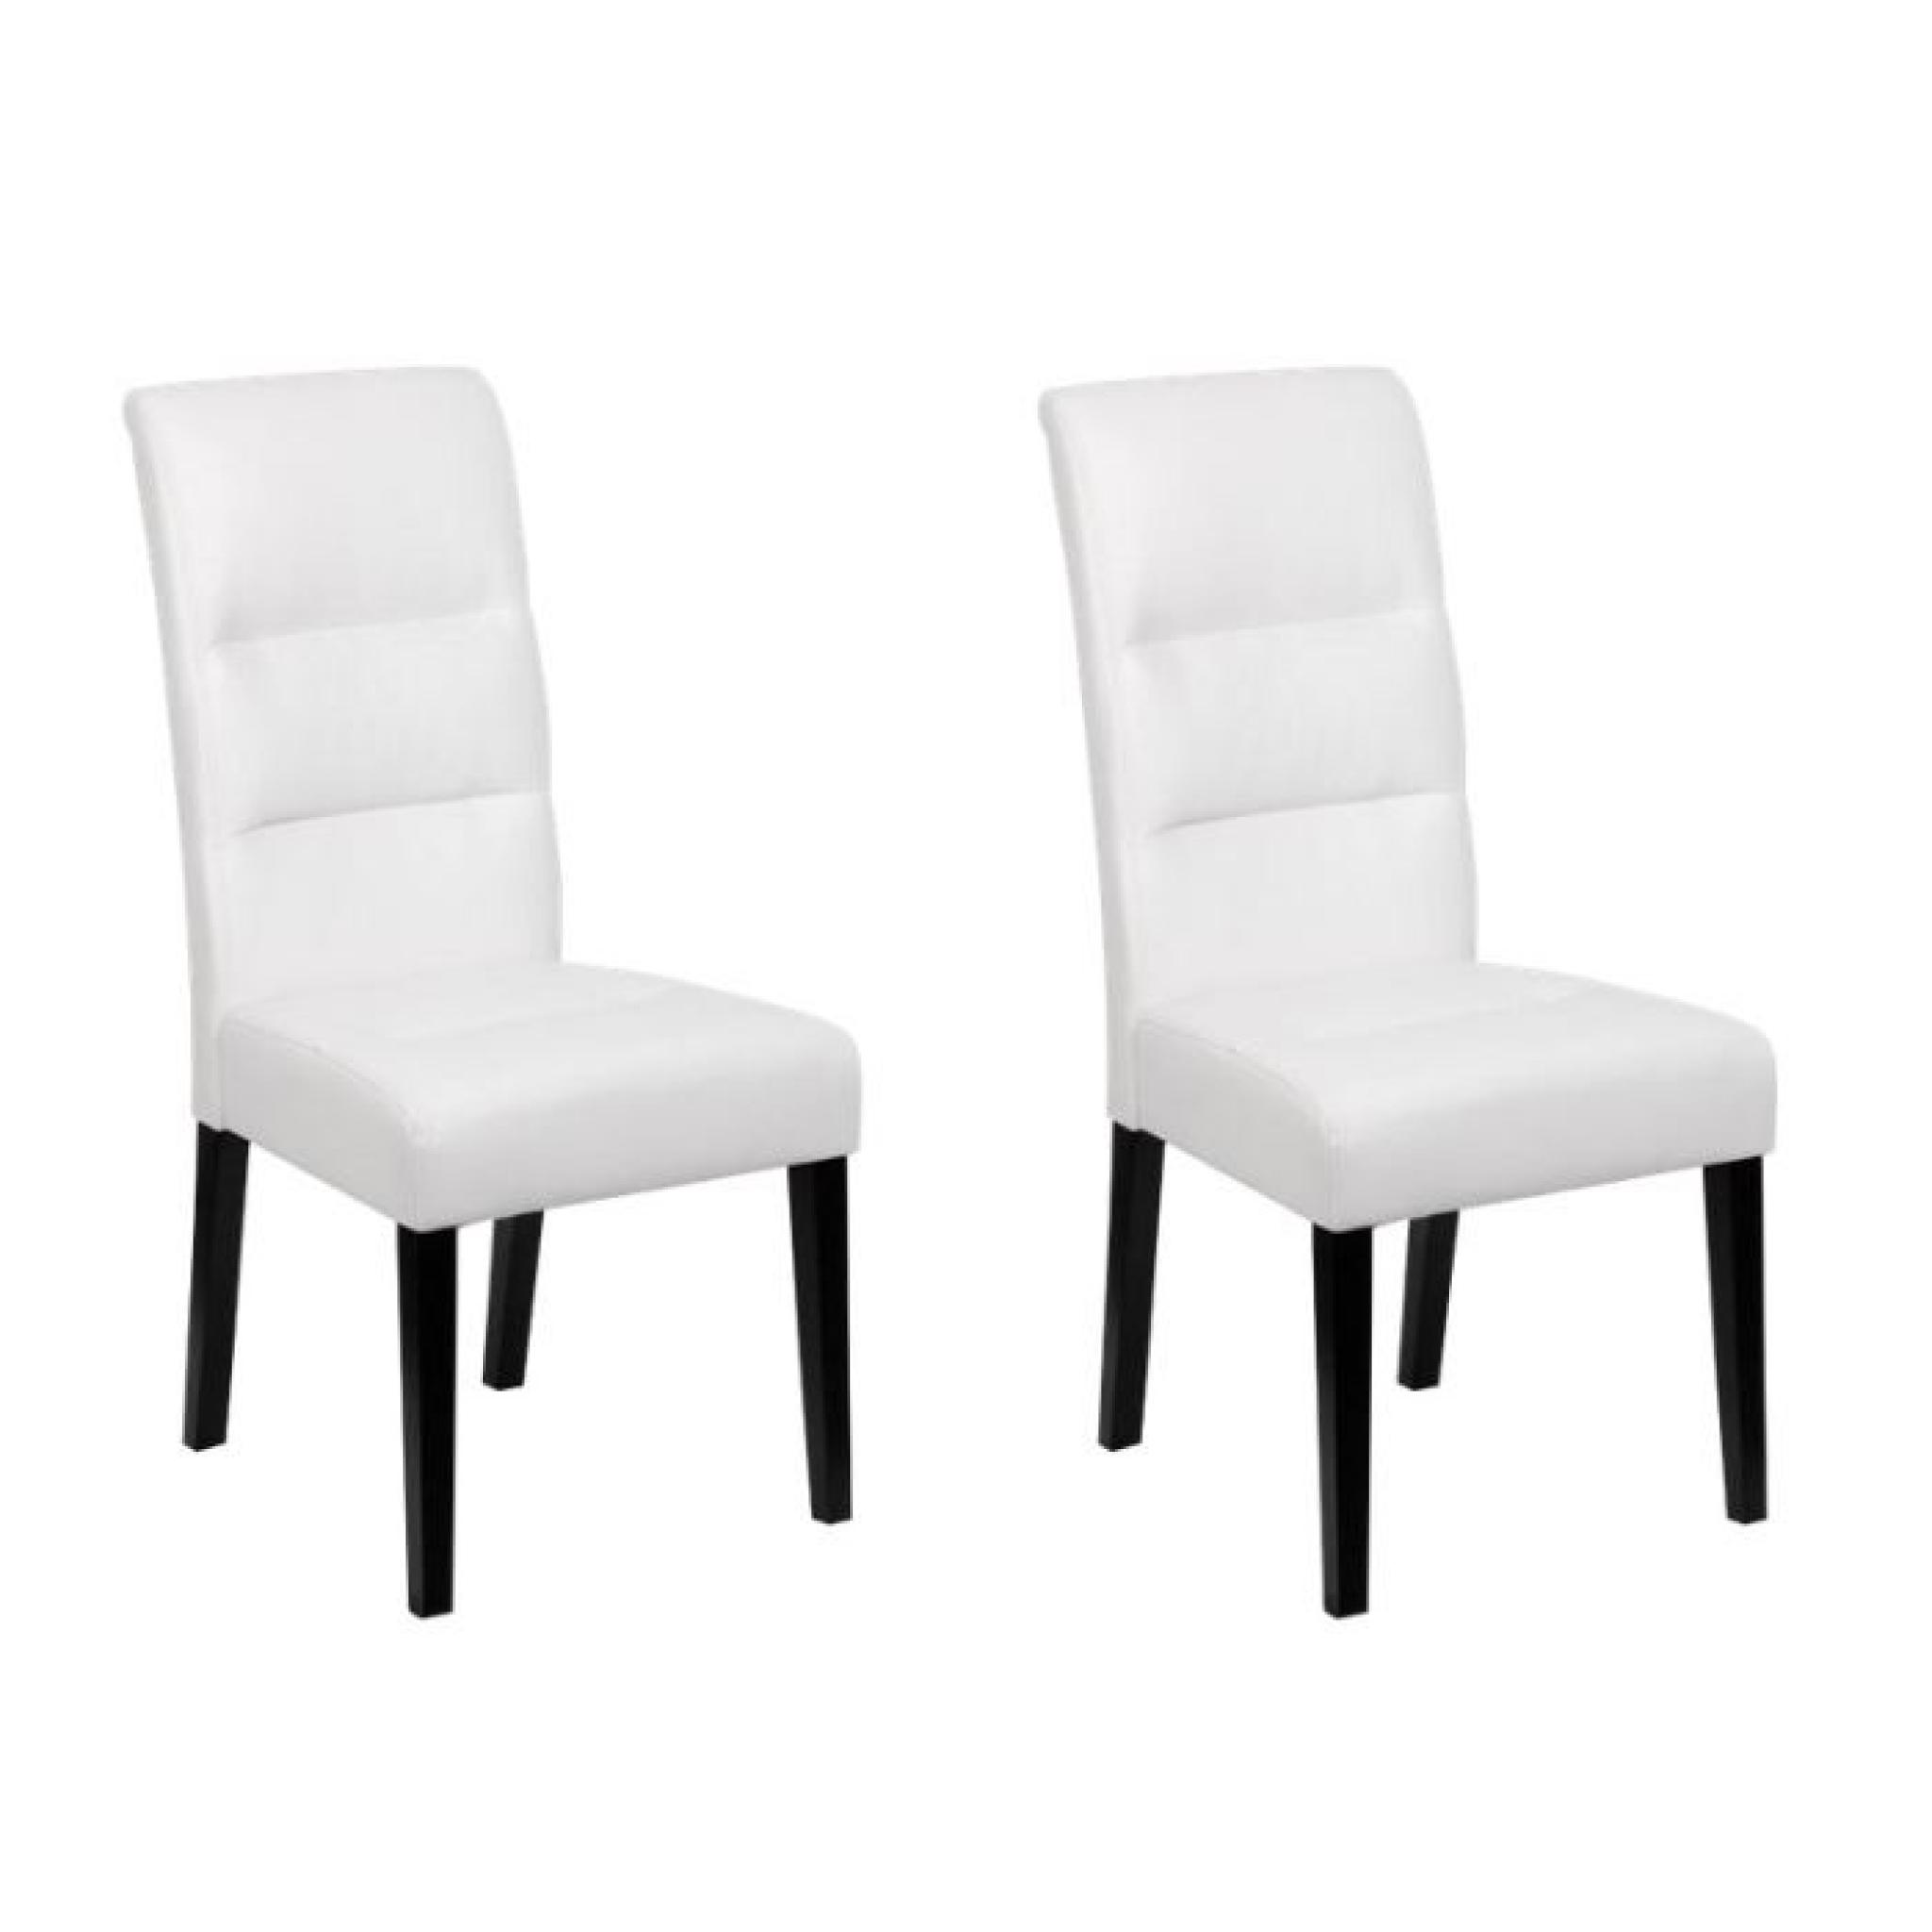 Daphne - Lot 2 Chaises Blanches